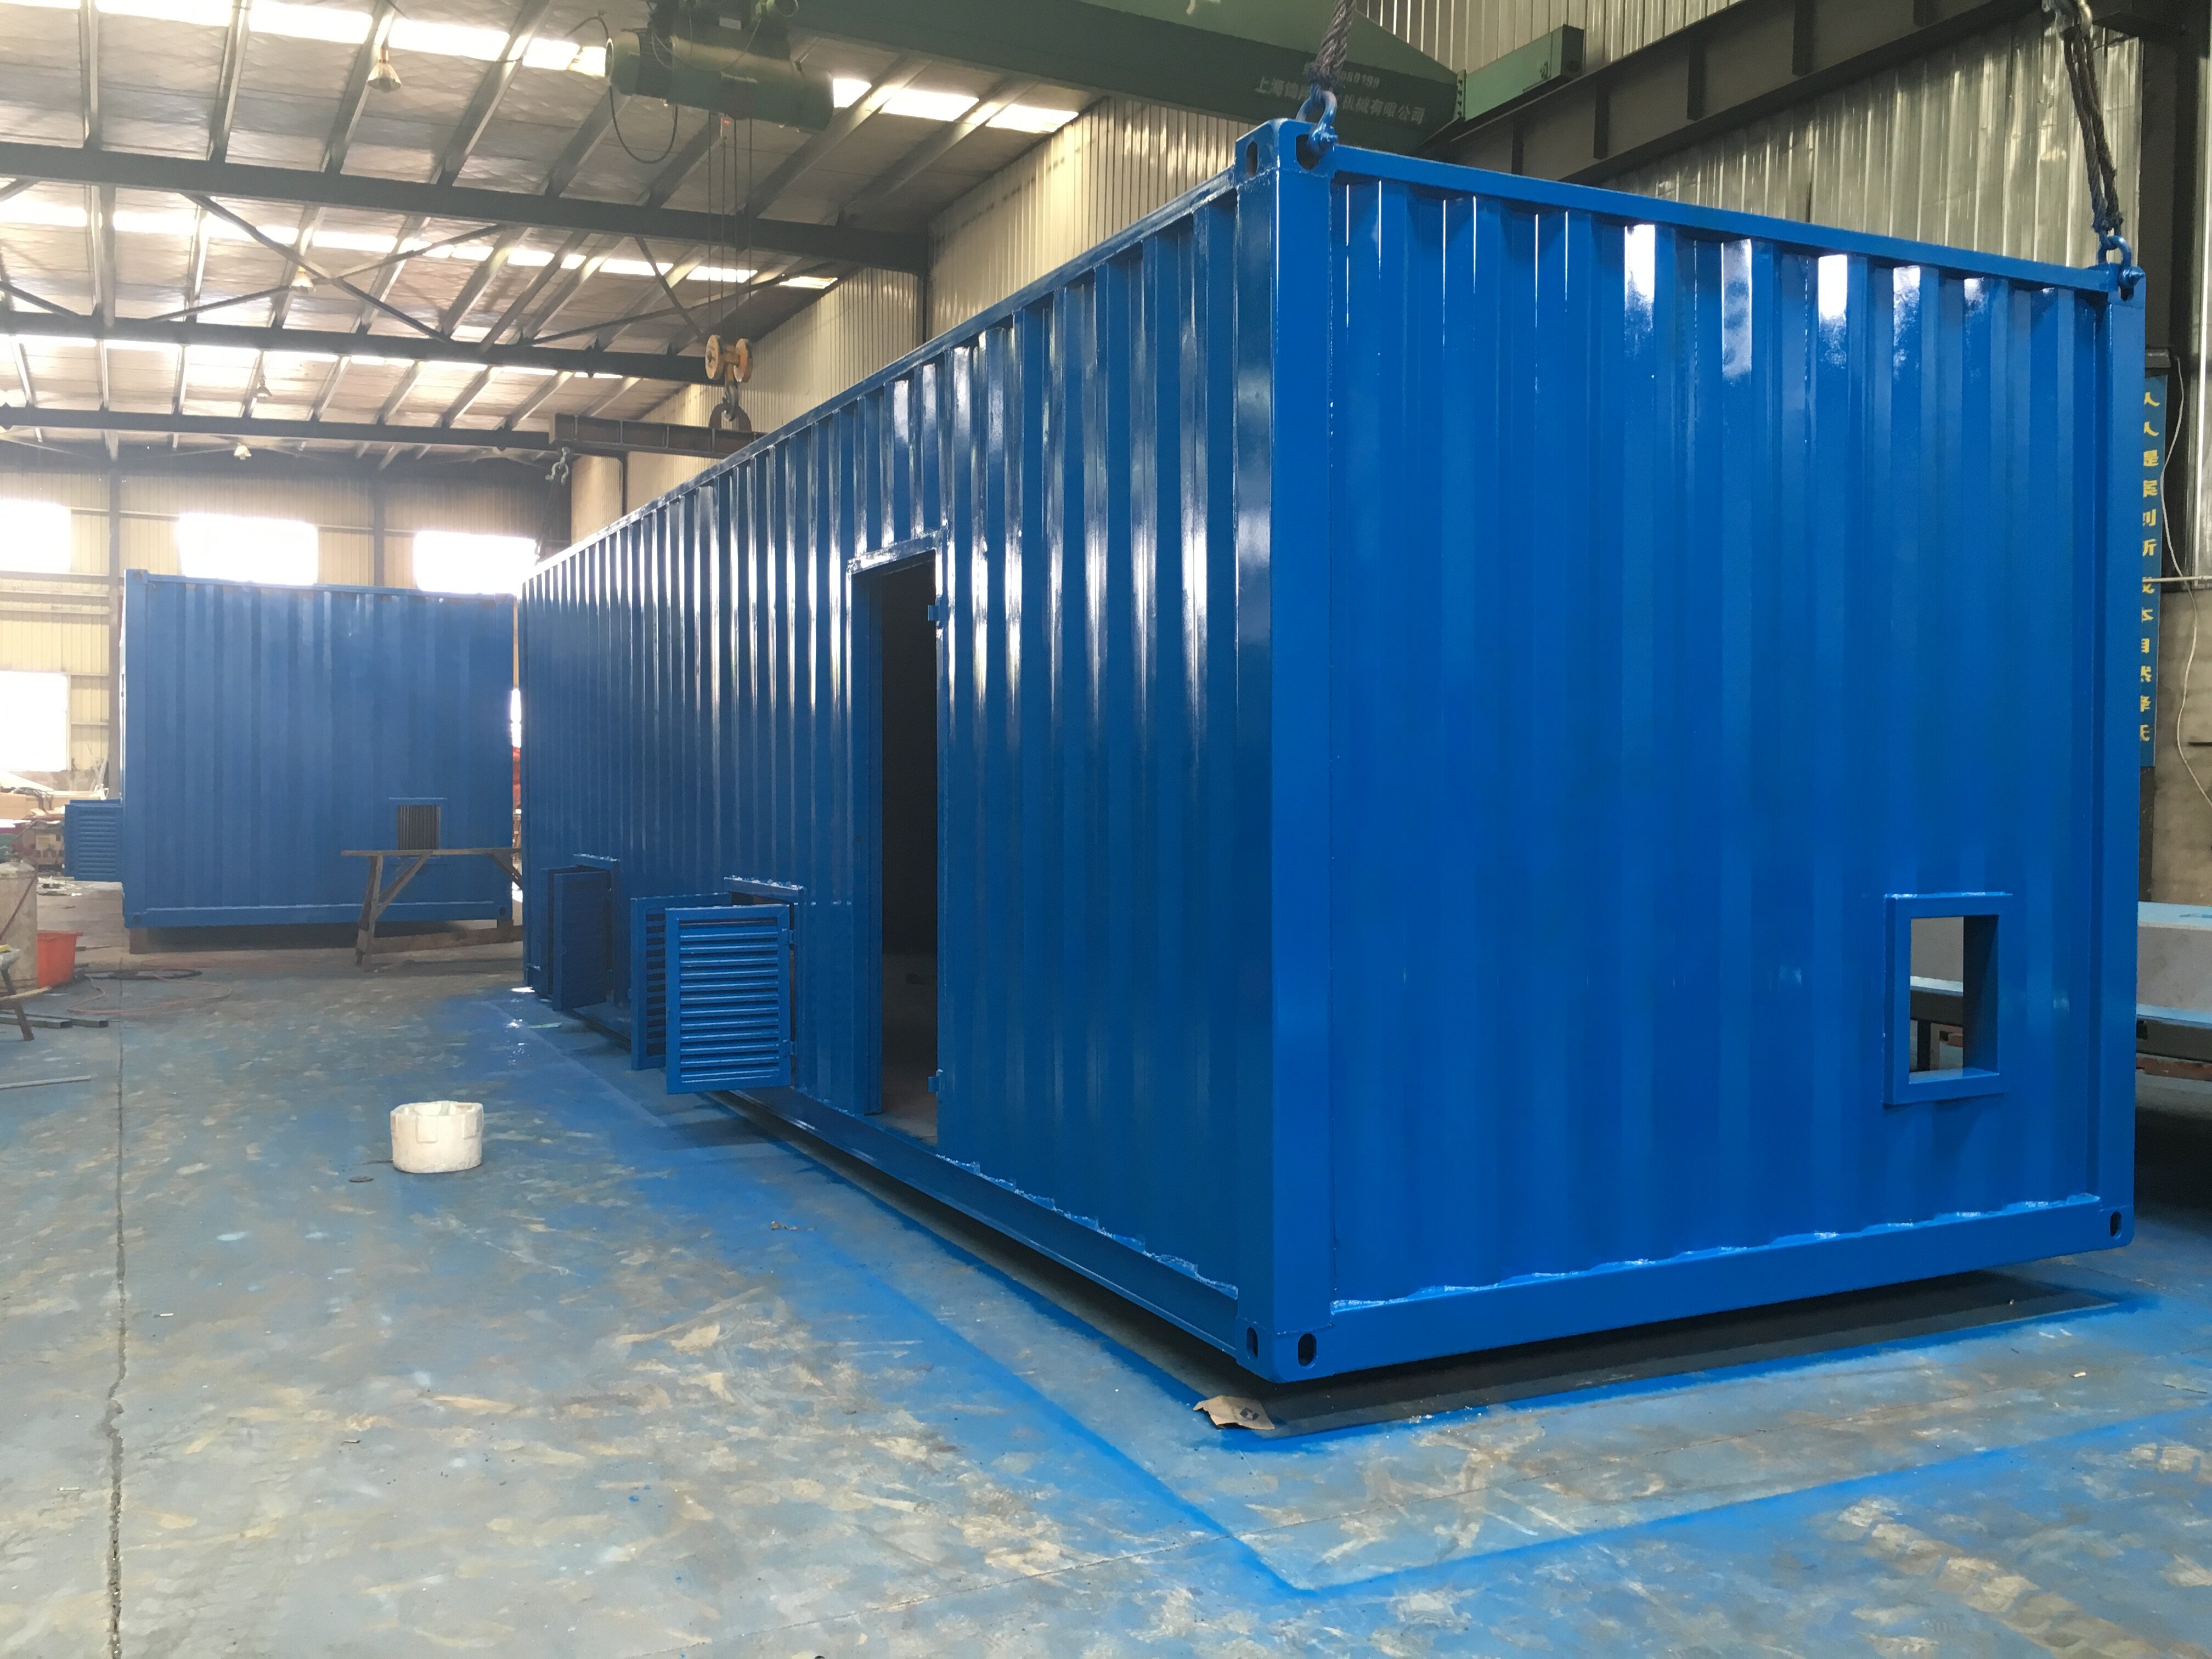 shipping container outdoor dining, sea containers private dining, dining tralier container company, dining tralier container exporter, dining tralier container china